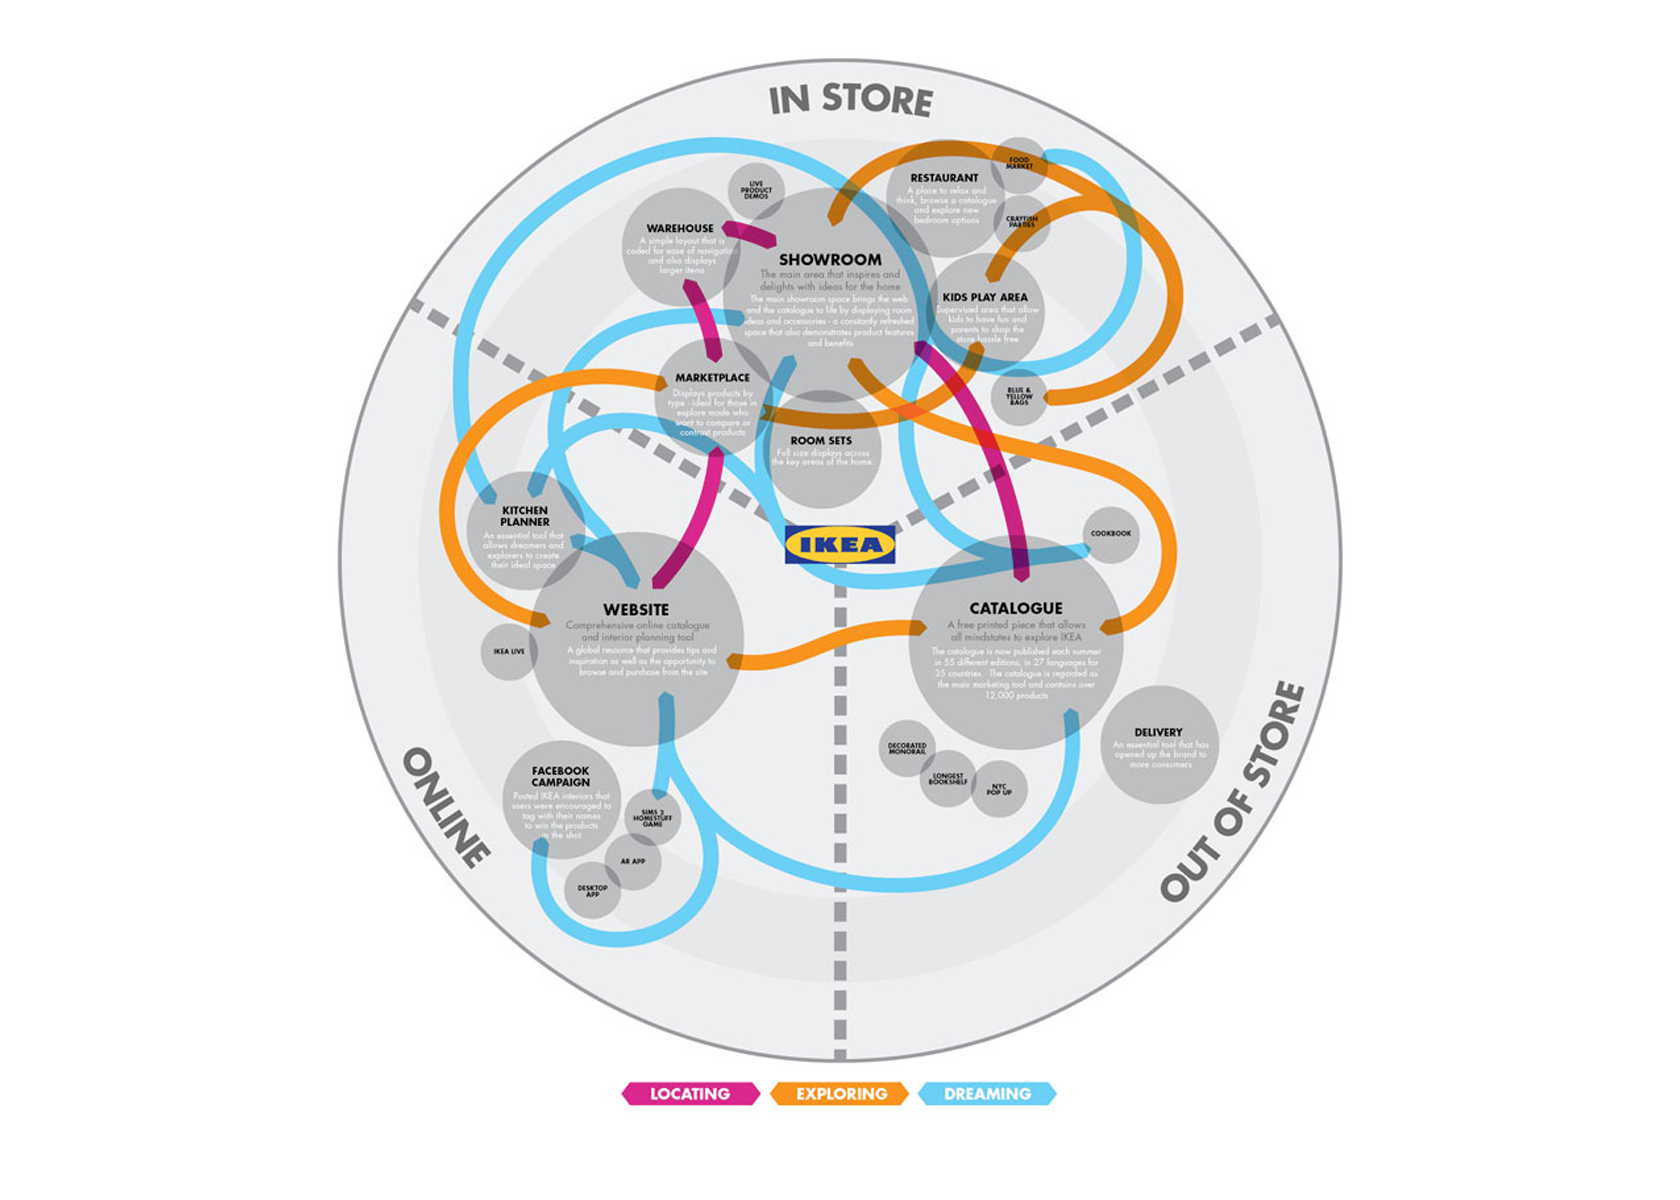 customer journey model with digital and physical touchpoints